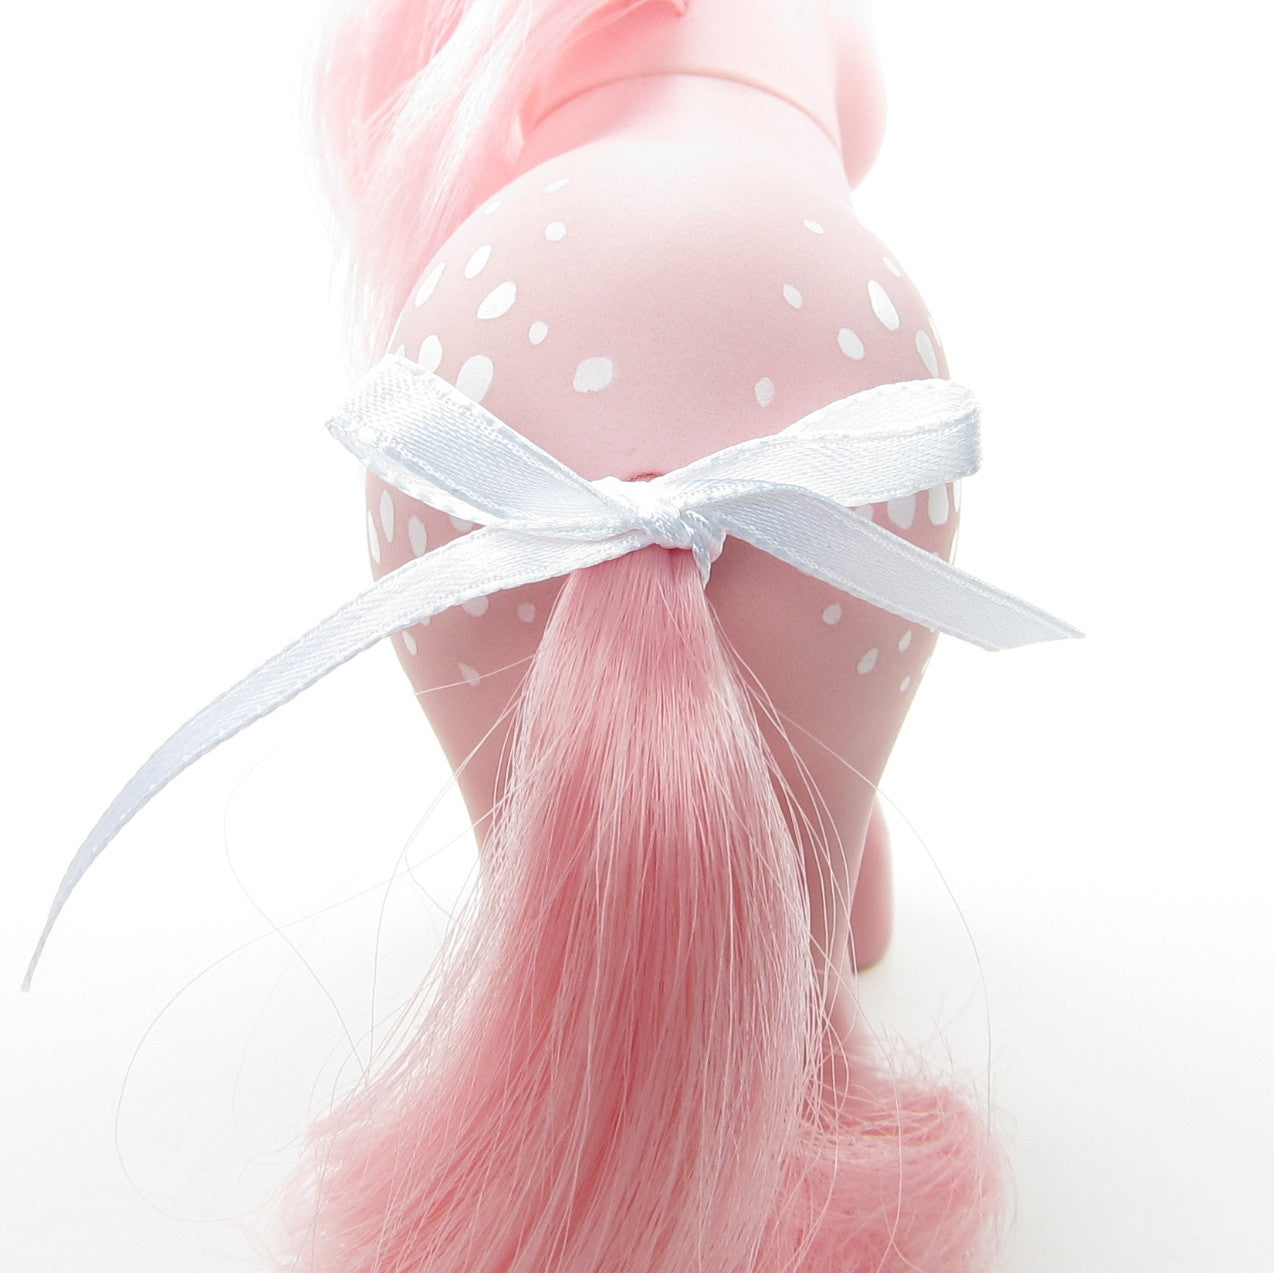 White My Little Pony replacement hair ribbon